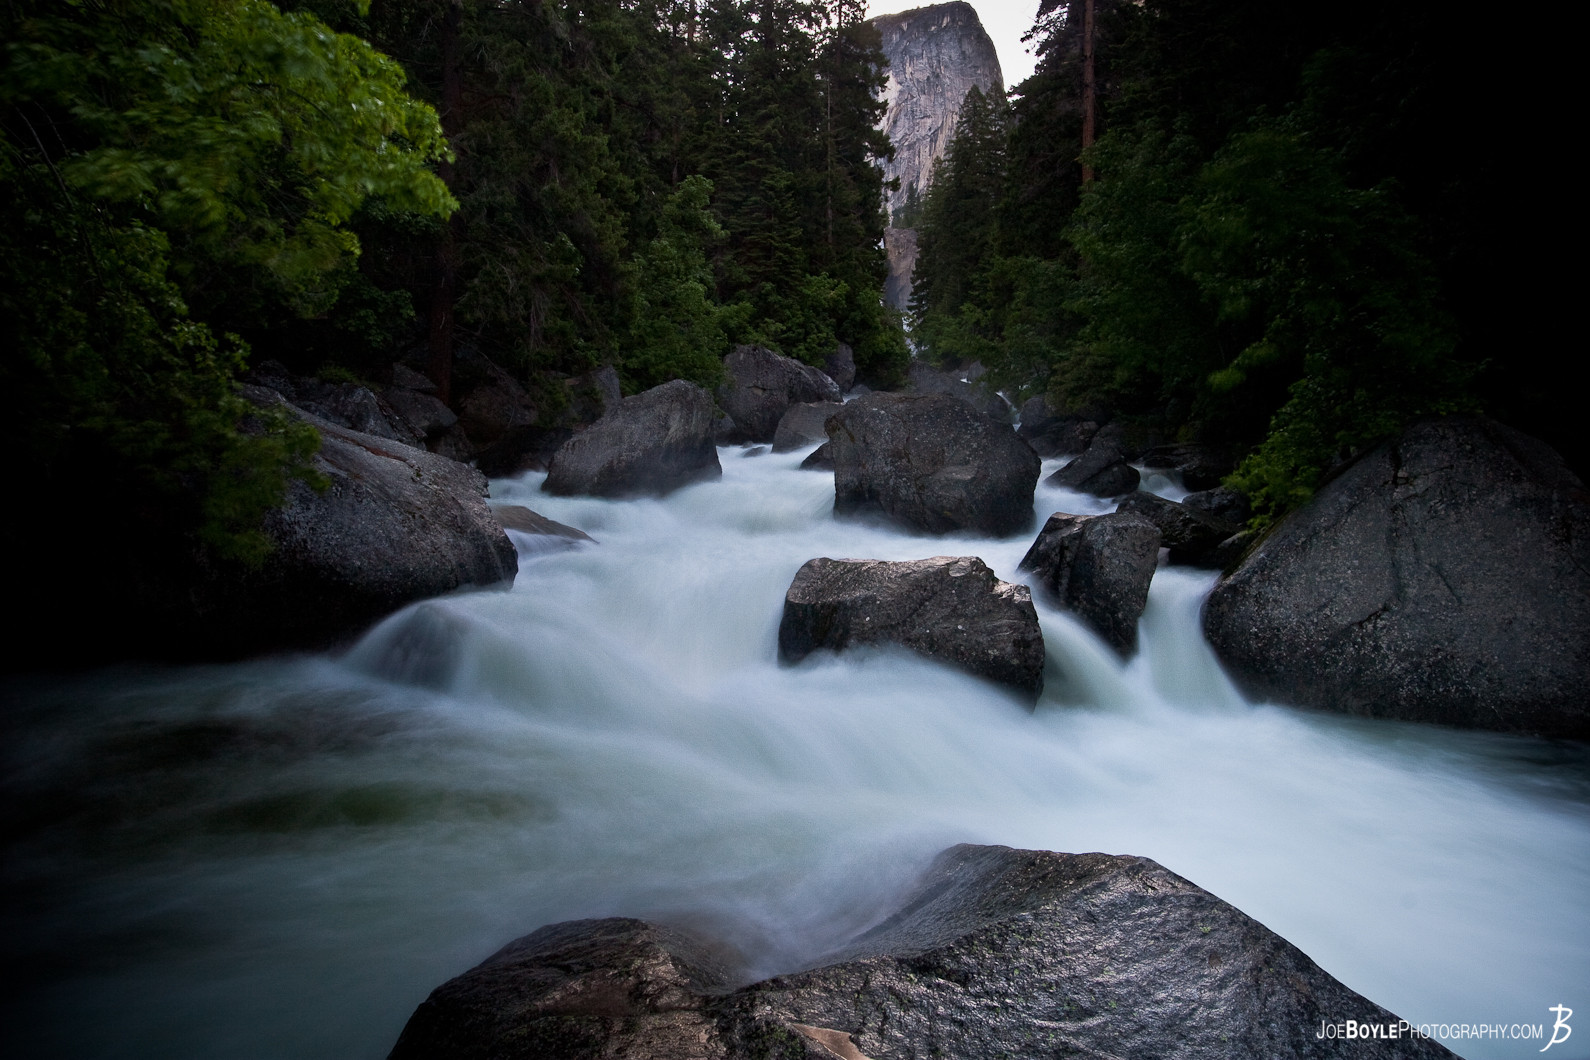  This is a photo of the Merced River after Vernal Falls on the John Muir Trail. I believe this was the first or second day into the 3 week trip of the JMT so it is very near the start of the trail if you're beginning in the north. 